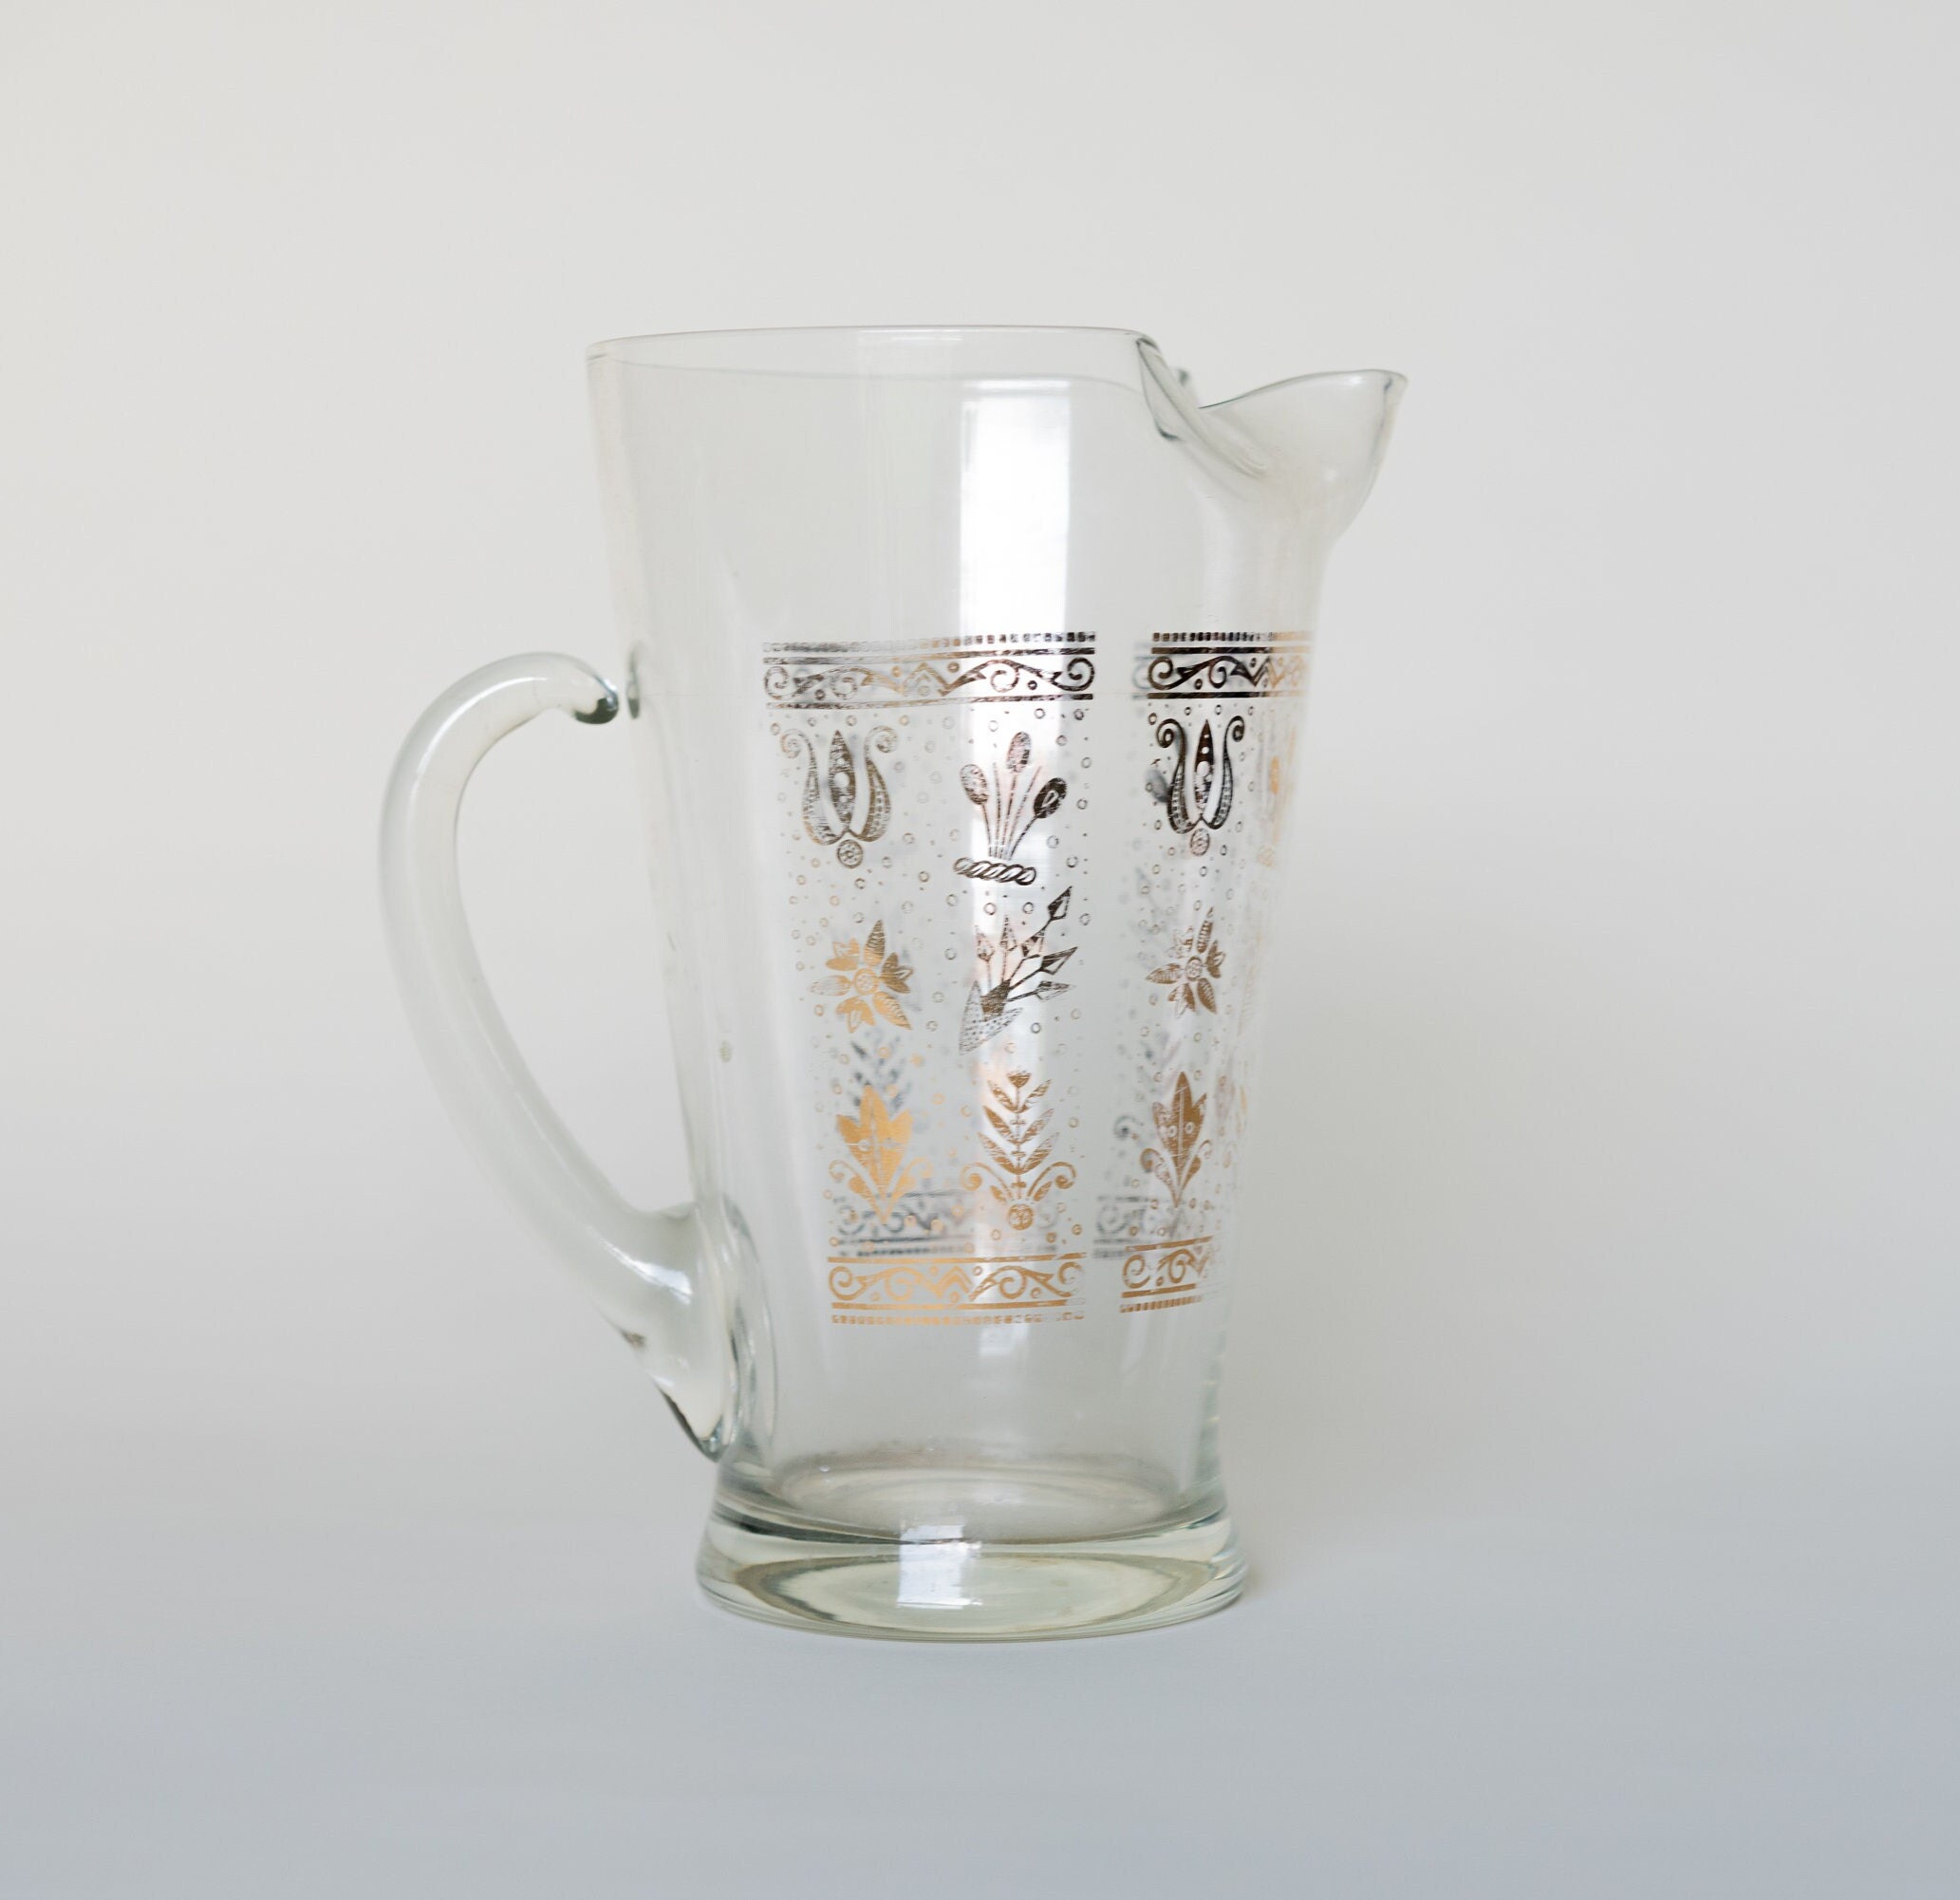 40 oz Vintage Pitcher Embossed Sunflower Design Pressed Clear Glass Pitcher  Made of Lead-free Borosilicate Glass Perfect for Serving Lemonade or Your